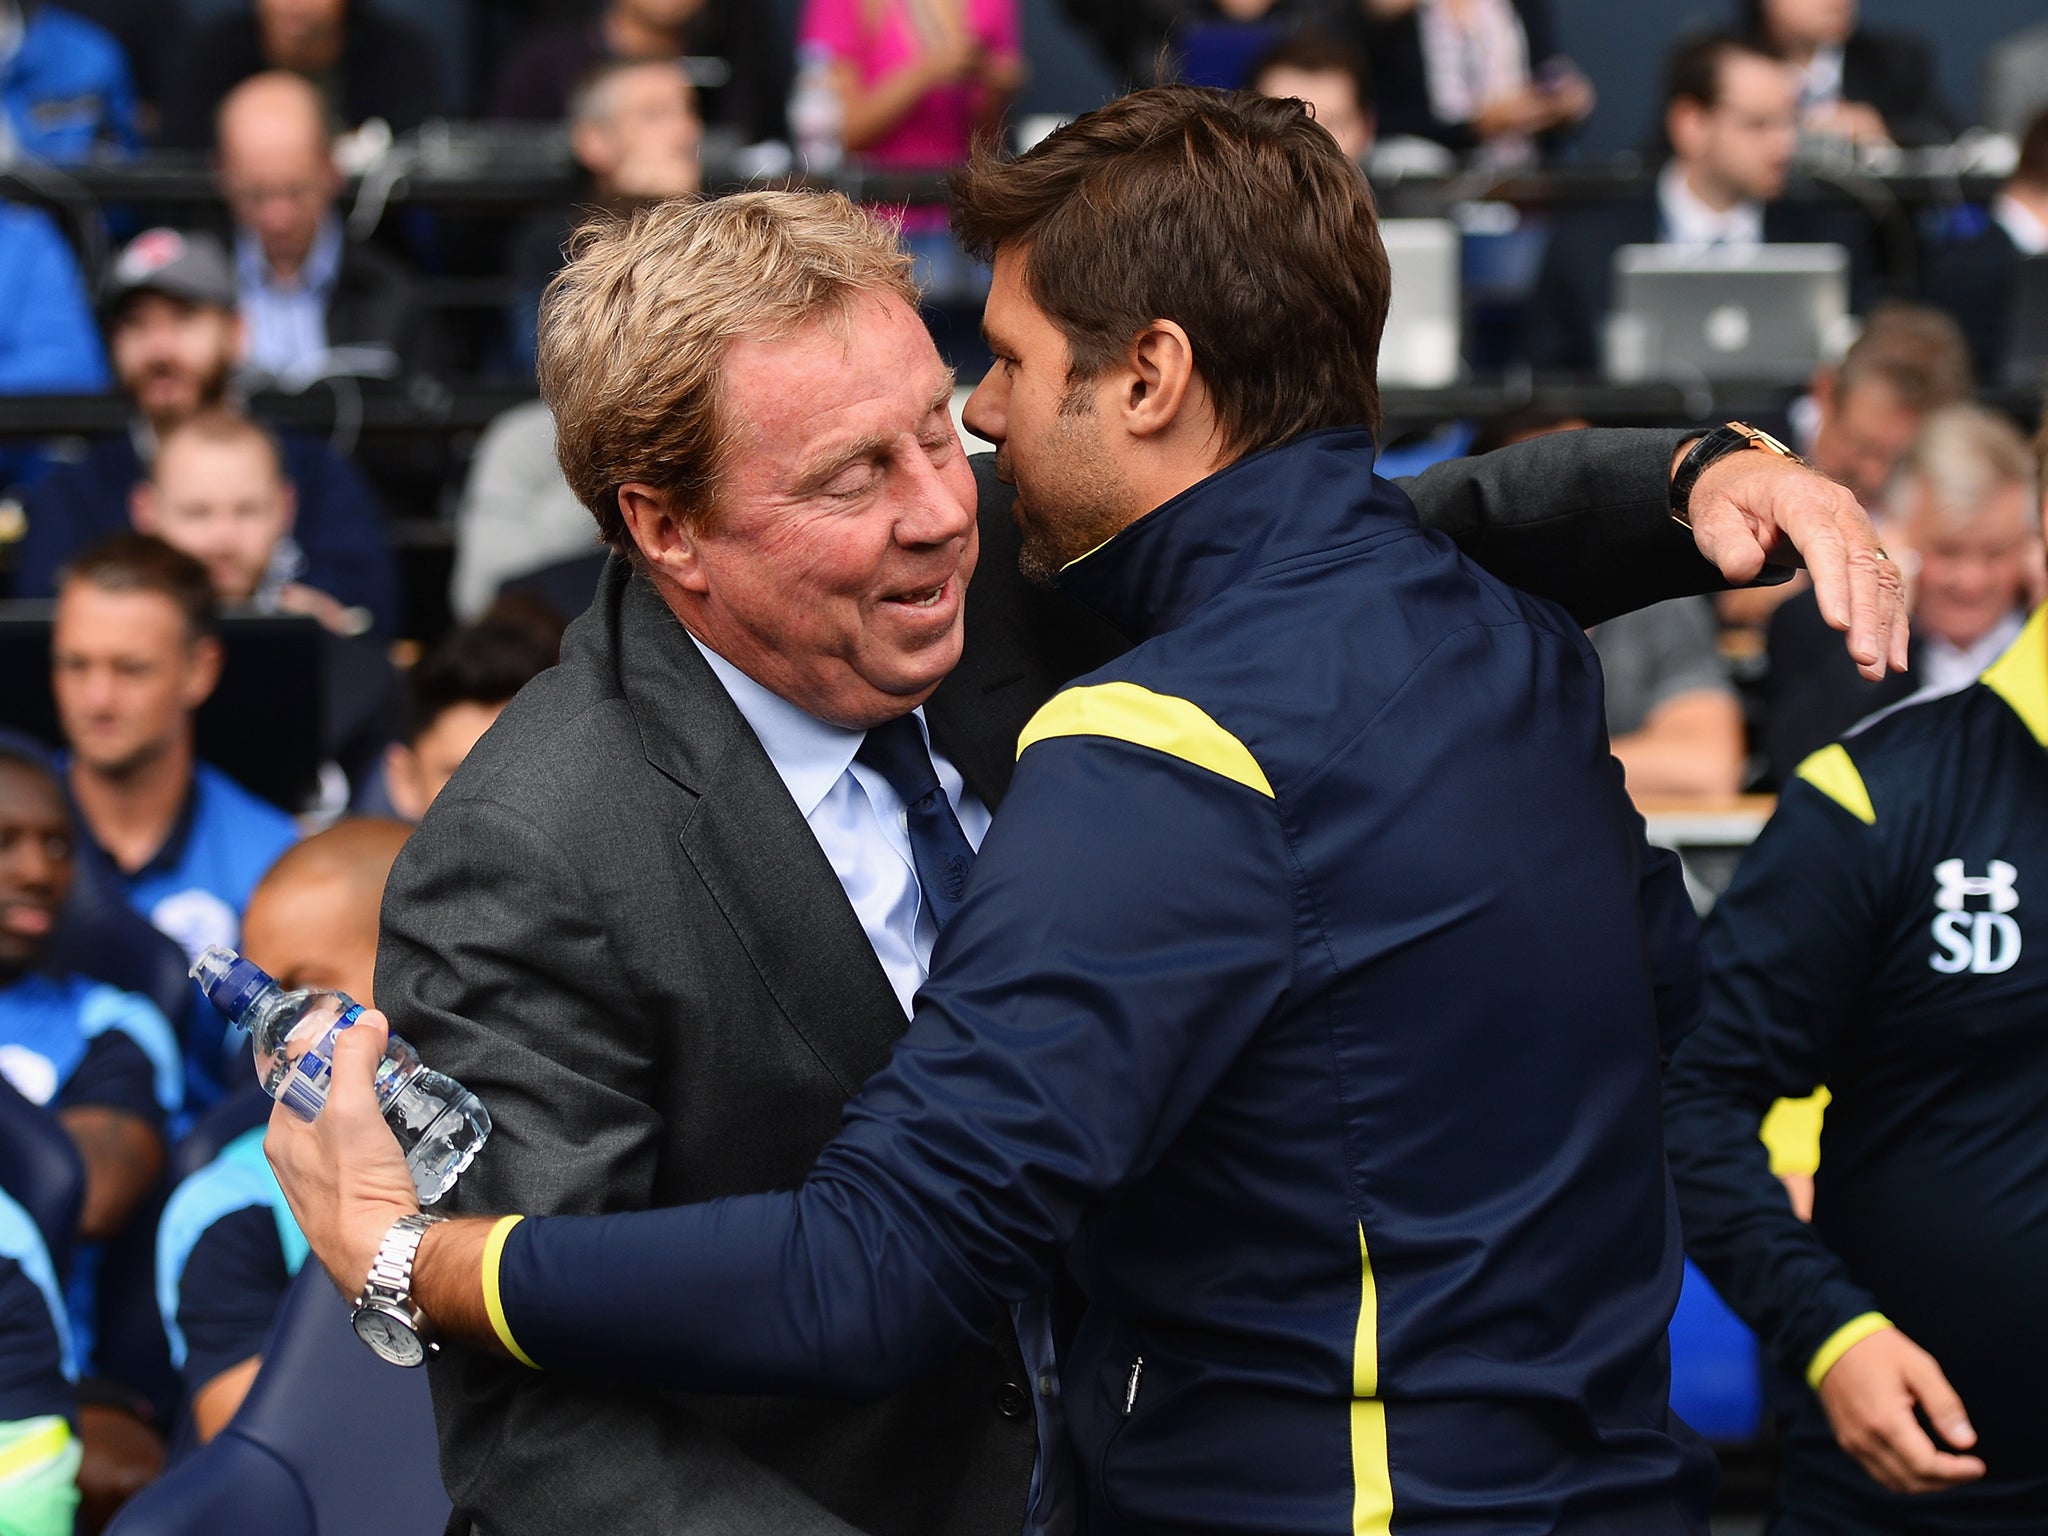 Harry Redknapp, the QPR manager, is greeted by Mauricio Pochettino prior to the game at White Hart Lane